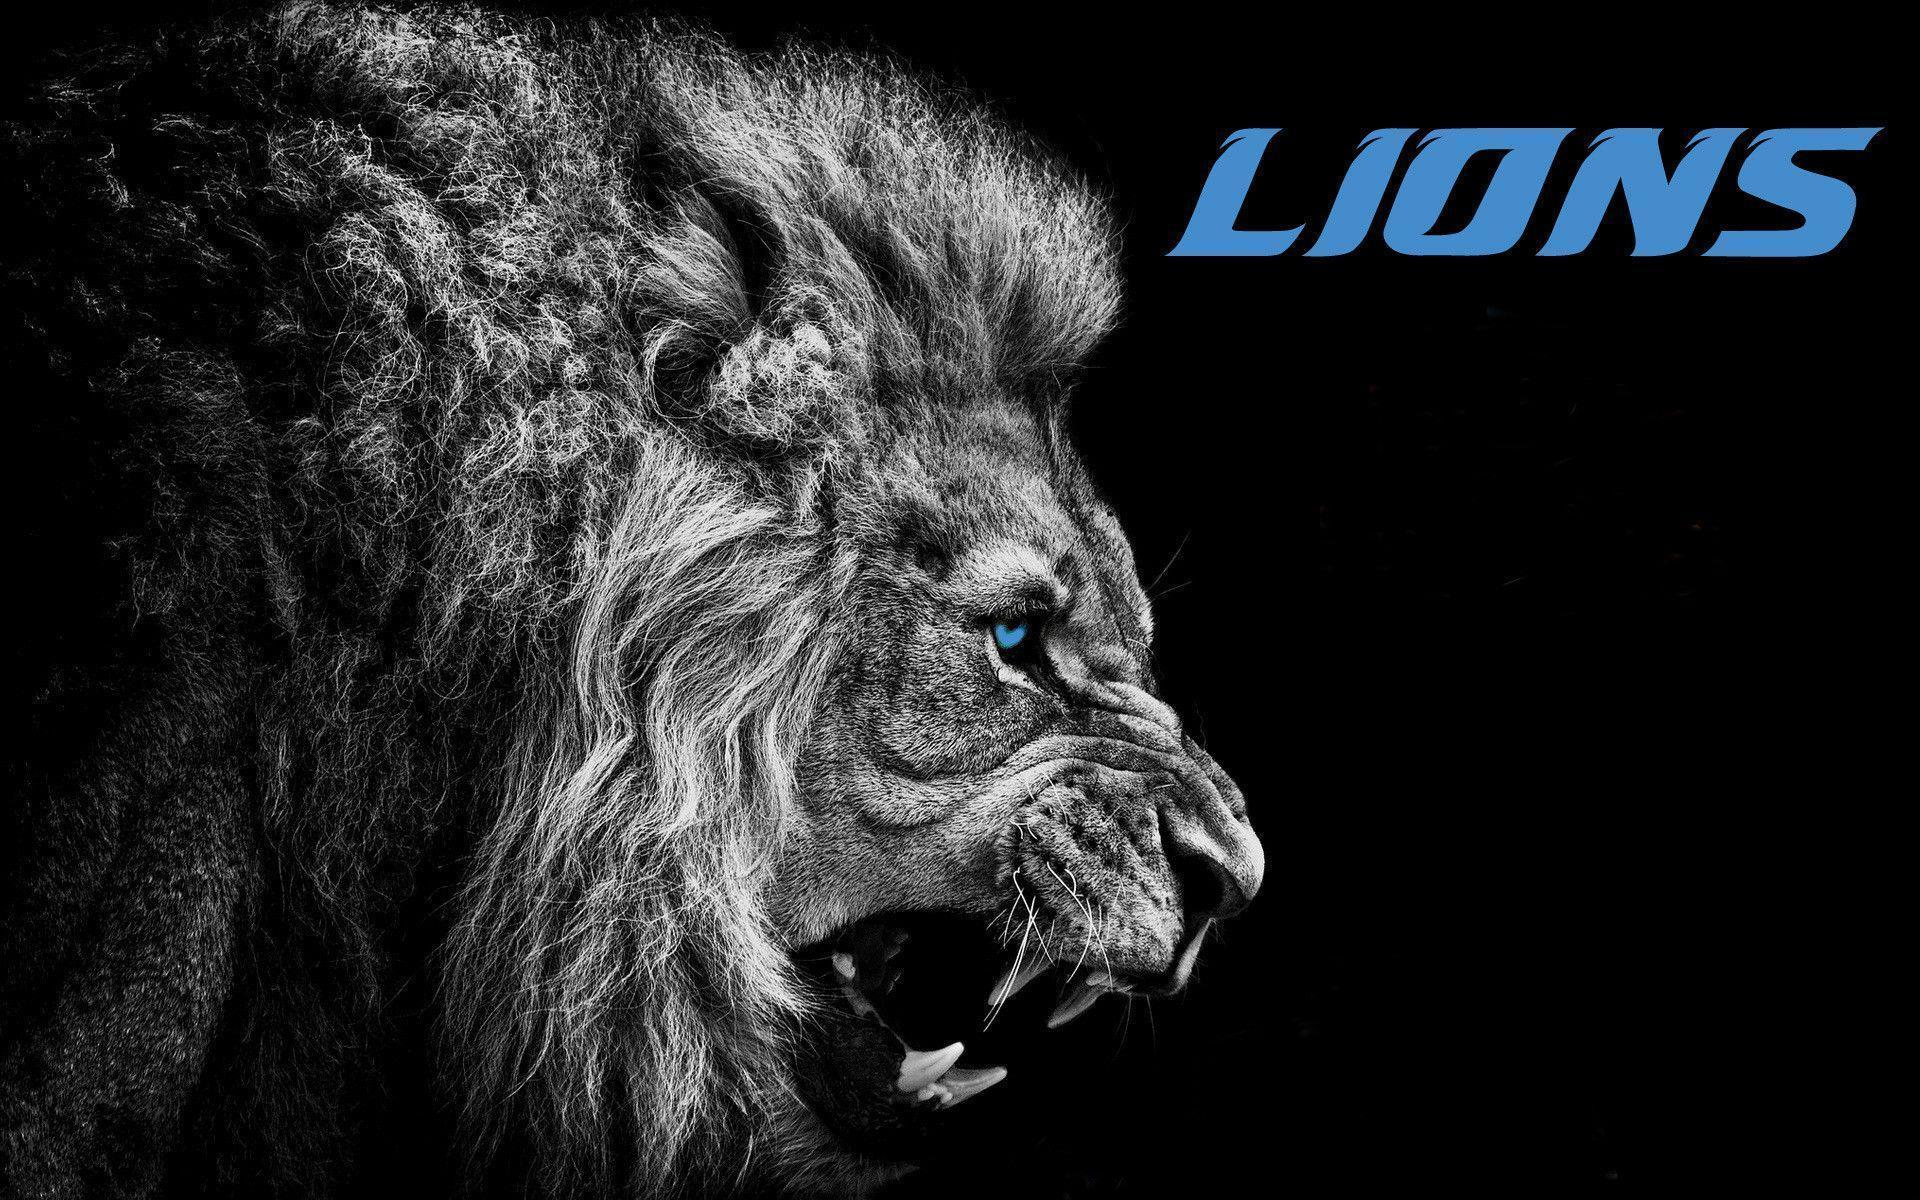 Detroit Lions Wallpapers and Background Images   stmednet